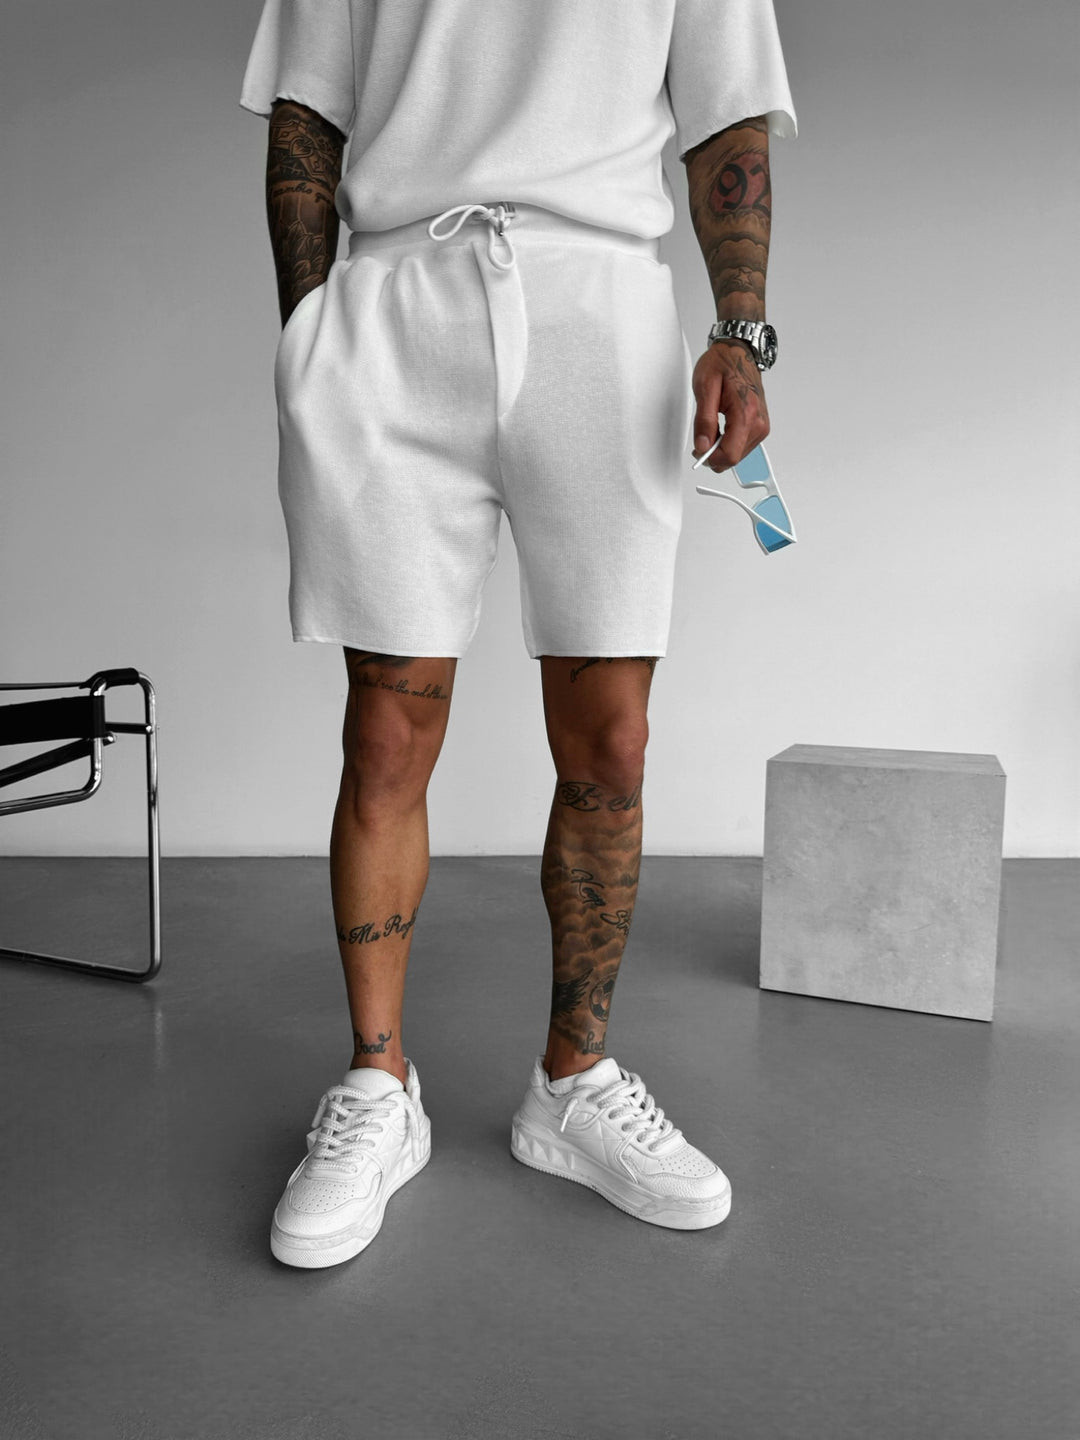 Loose Fit Knit Shorts - White